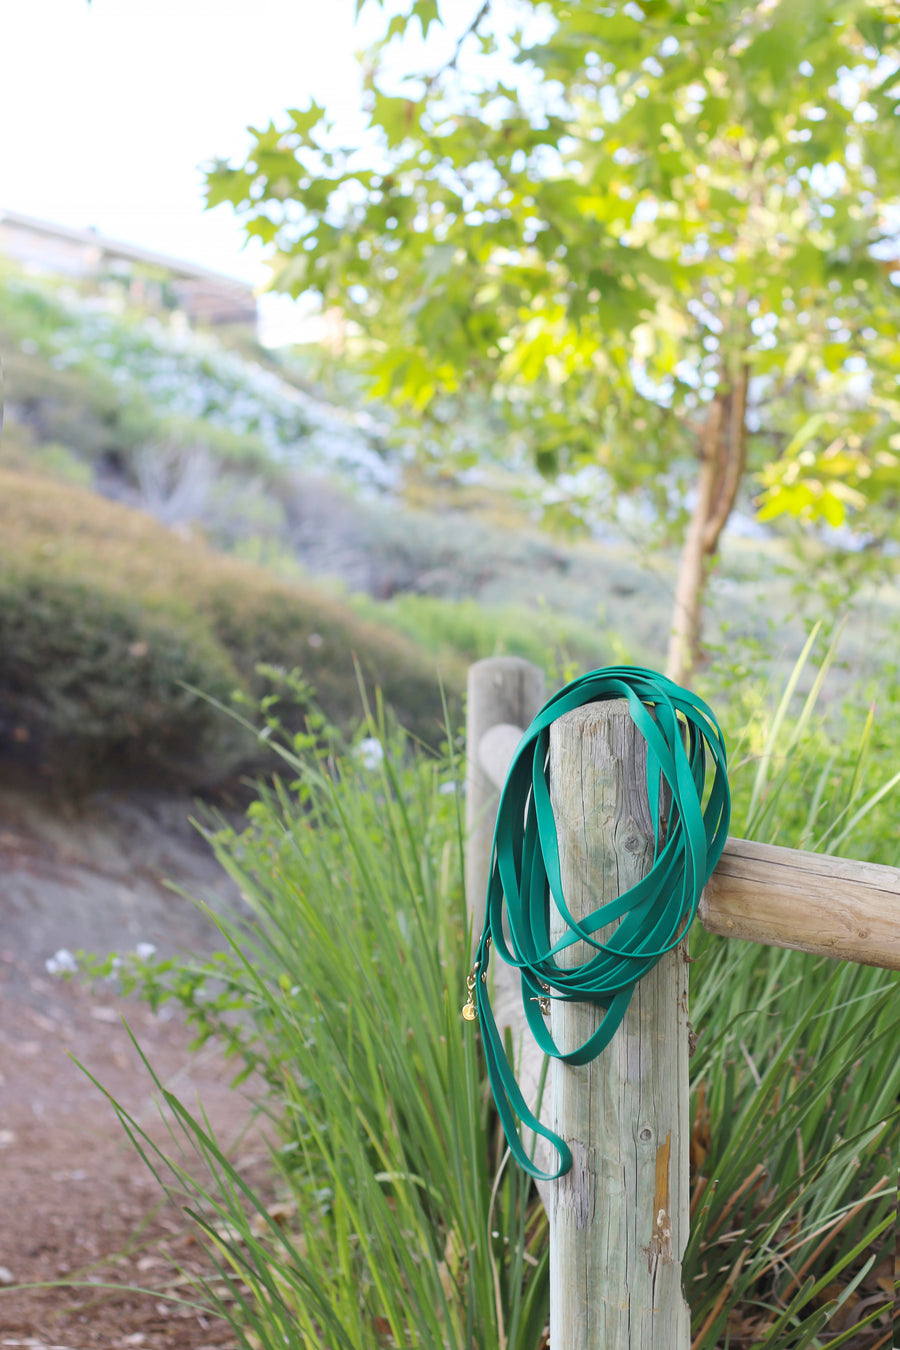 Meadow Green Waterproof Cloud 30 Ft Dog Leash | Lightweight PVC Long Leash | Odor Proof, Stink Proof, and Durable Dog Lead | Available in 3 Lengths 